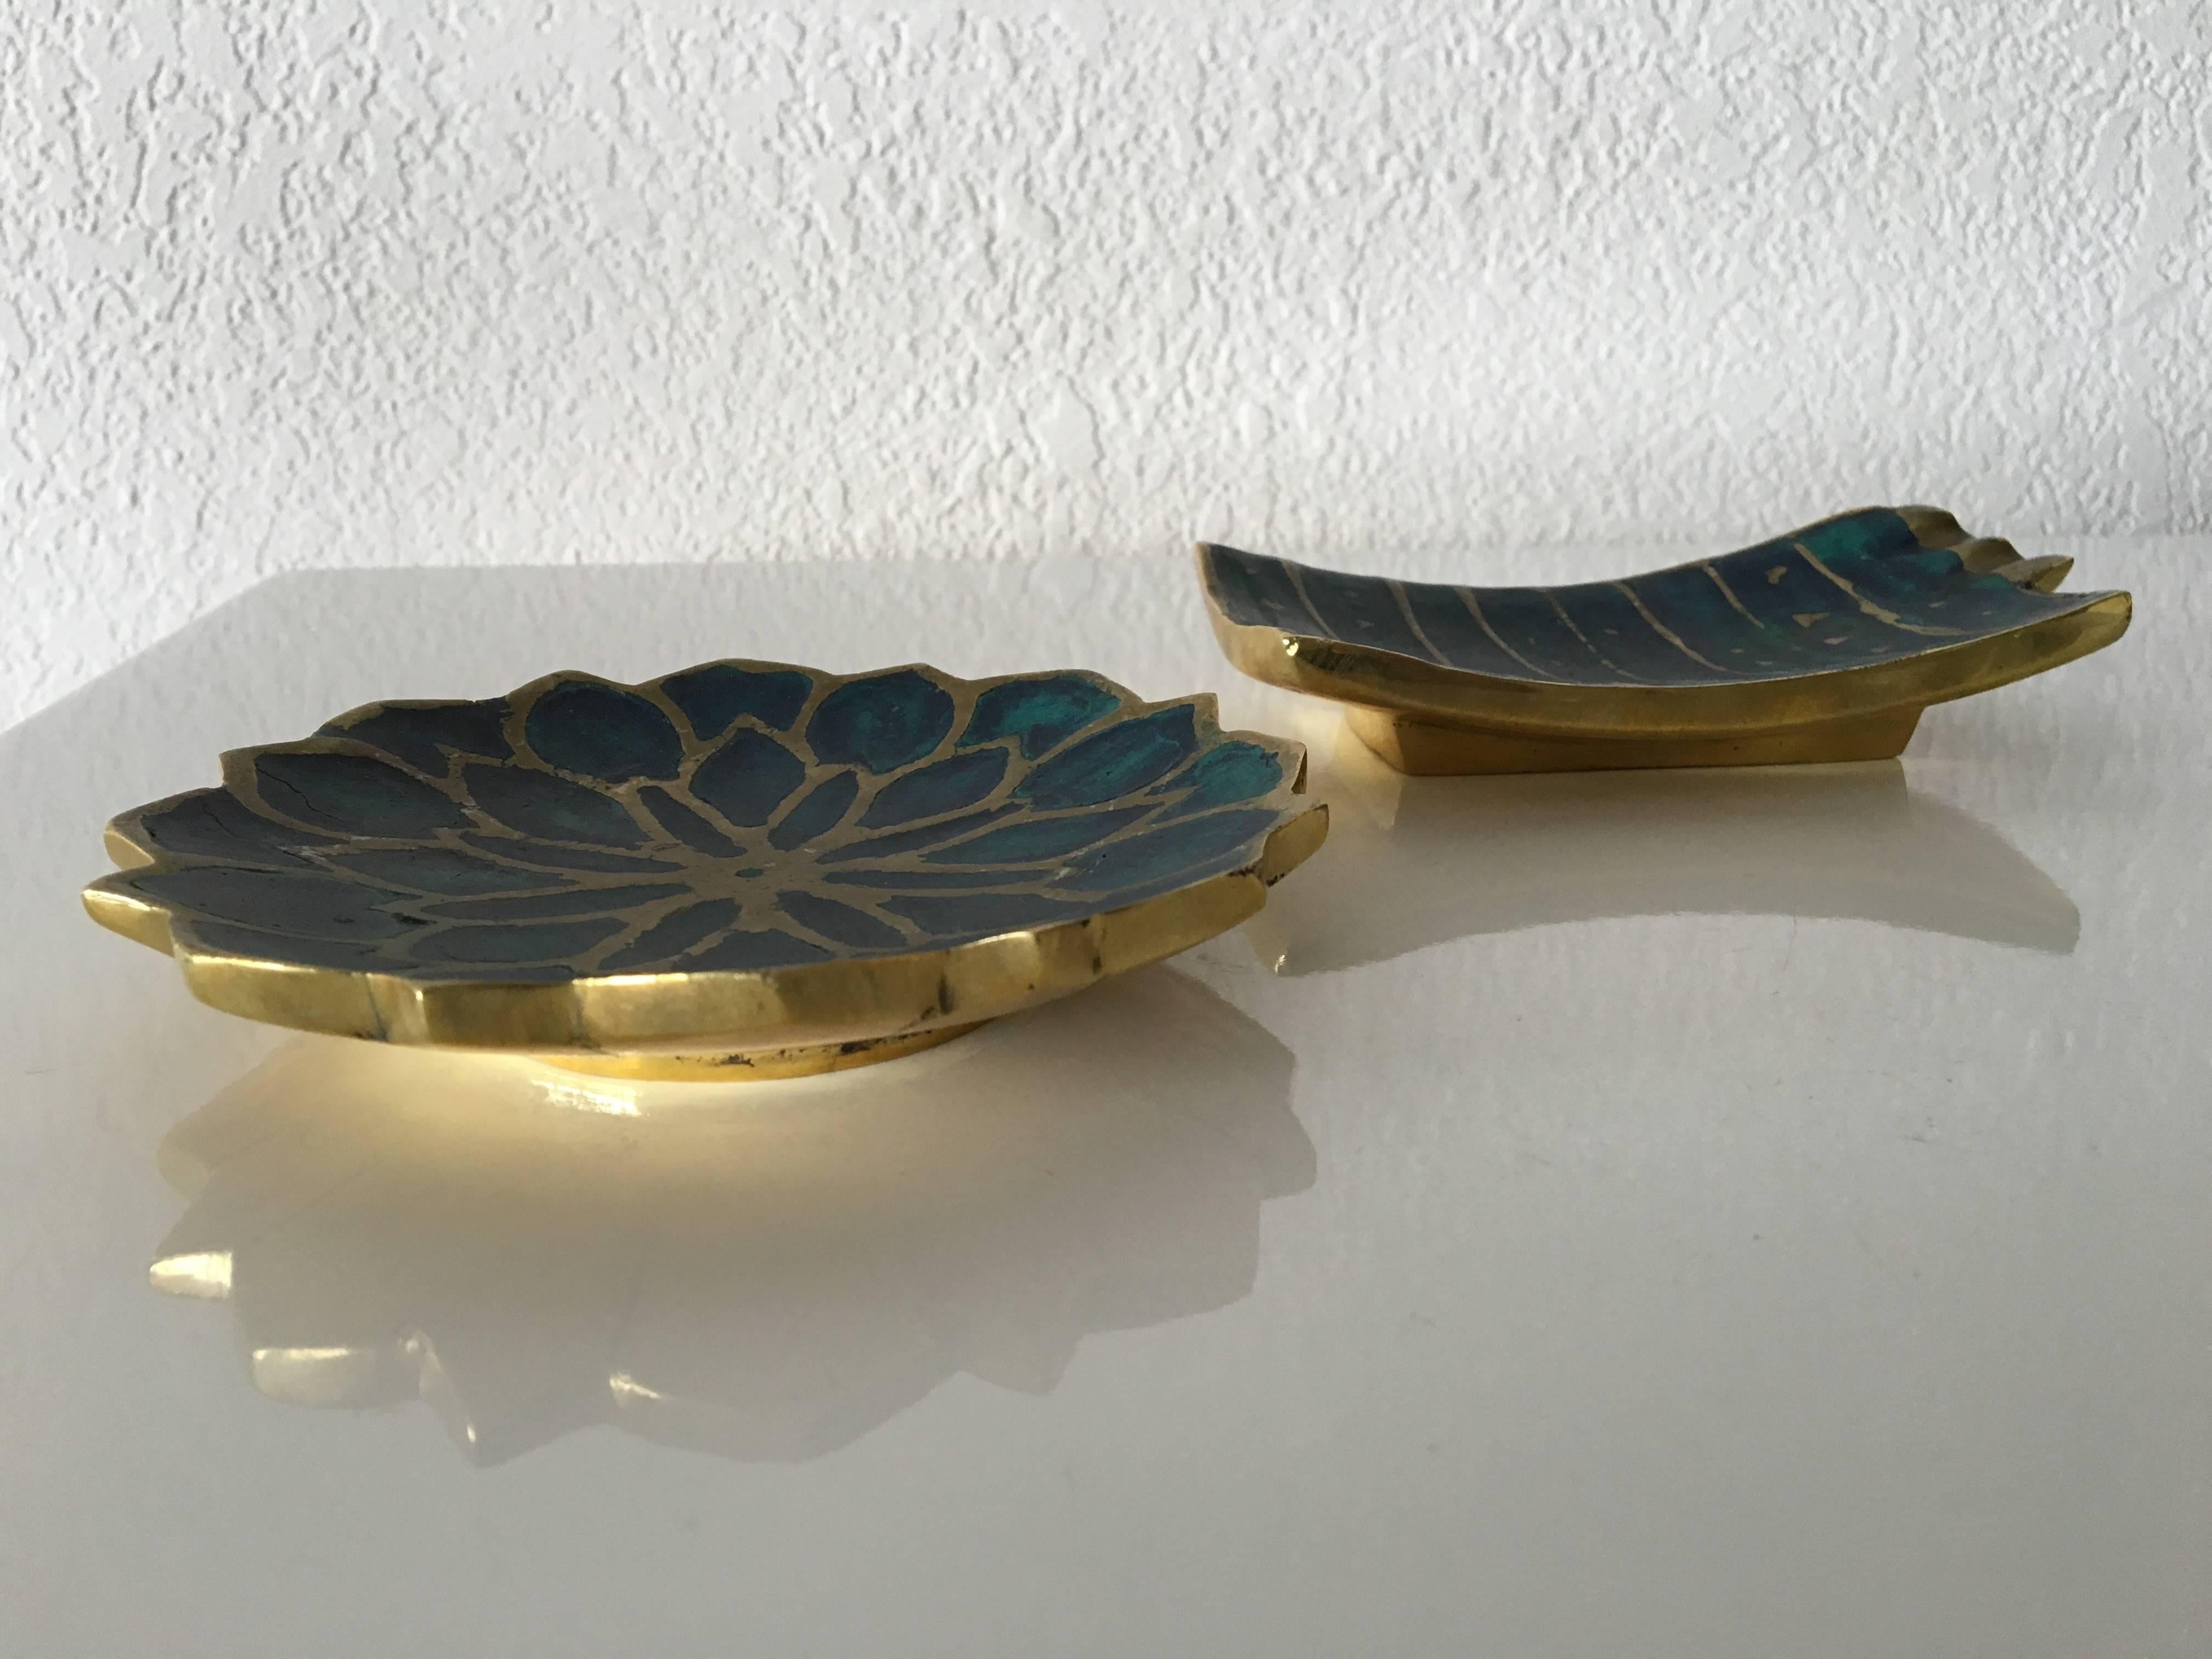 Beautiful ashtray and small lotus dish in solid brass and ceramic inlay,
by Pepe Mendoza.
Mexico City, circa 1960s

Measures: Astray: W 6